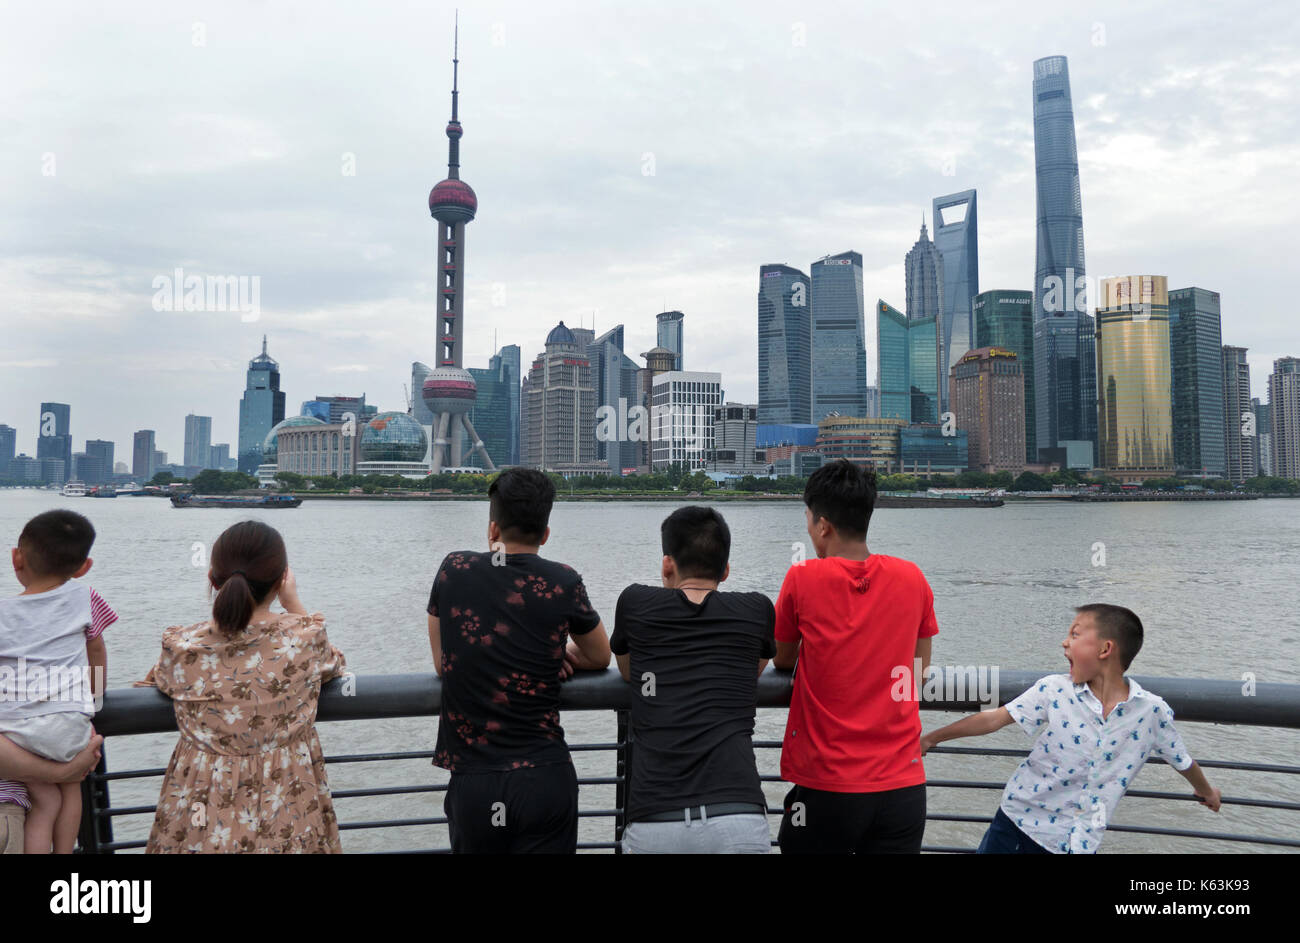 People and tourists watching the Bund of Shanghai, China, Asia with Huangpu River. Landscape in Chinese city with skyline, modern buildings, skyscrape Stock Photo